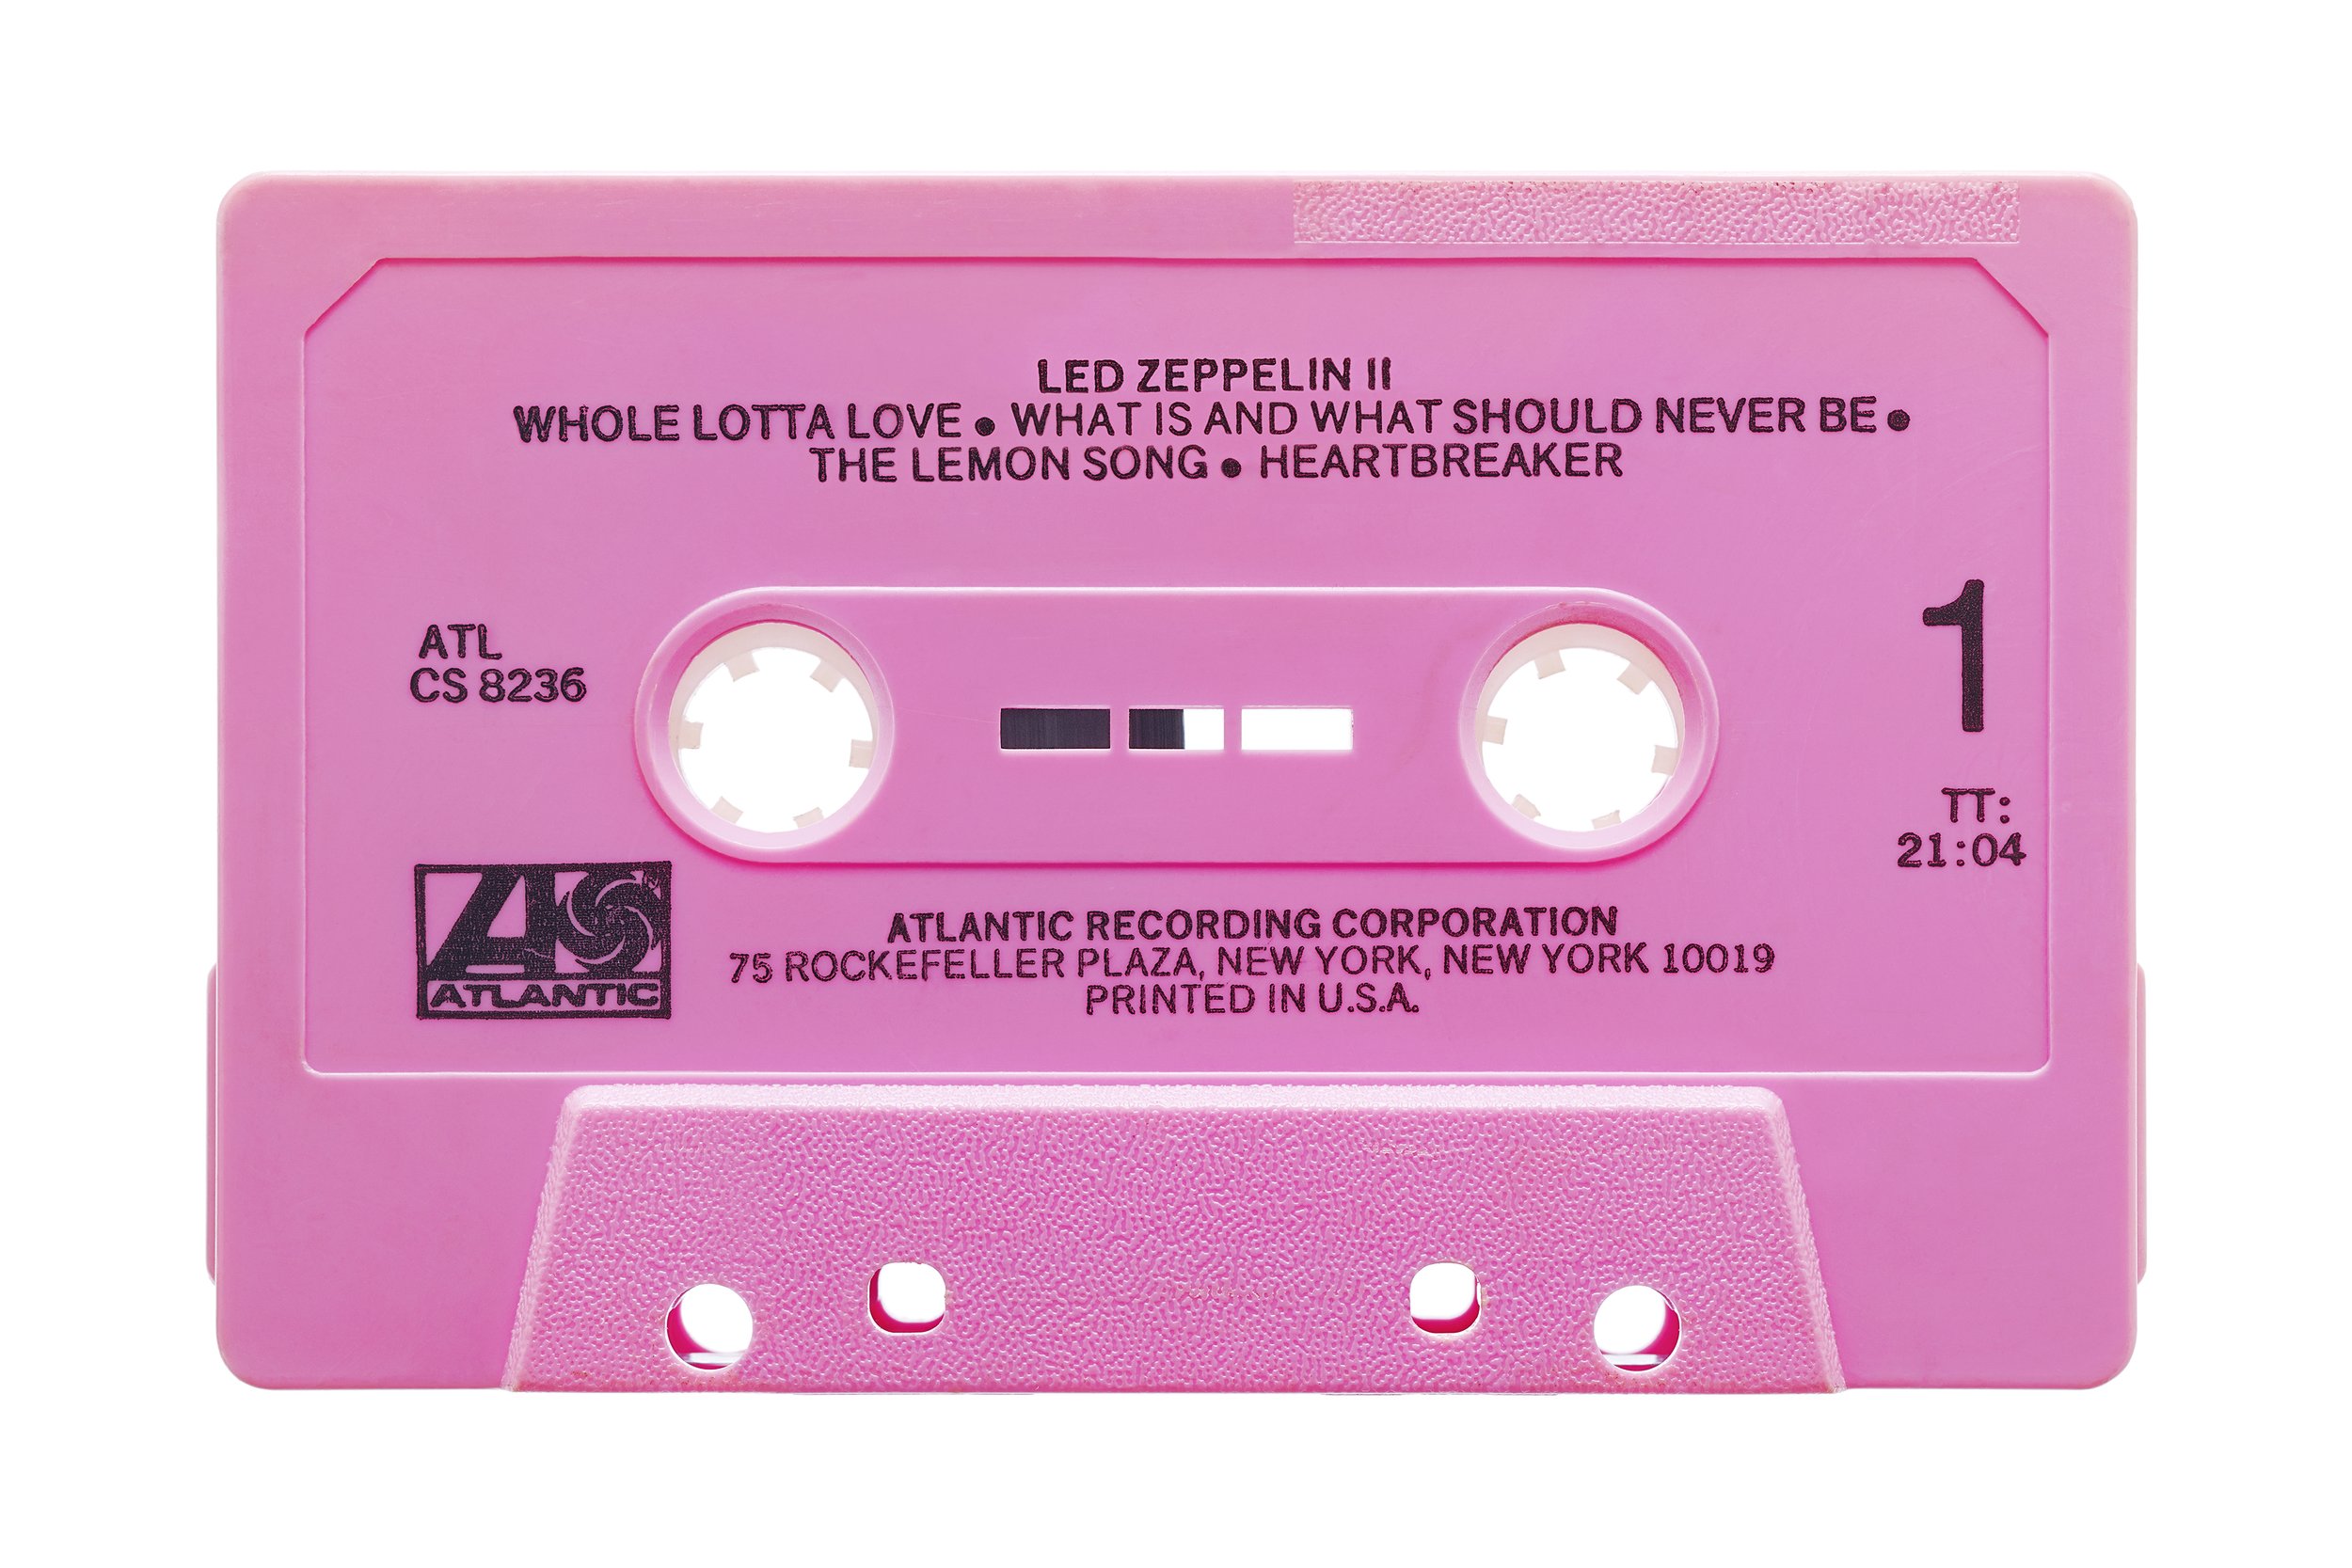  Led Zeppelin - II  Available through   Clic Gallery   in New York.    Contact   